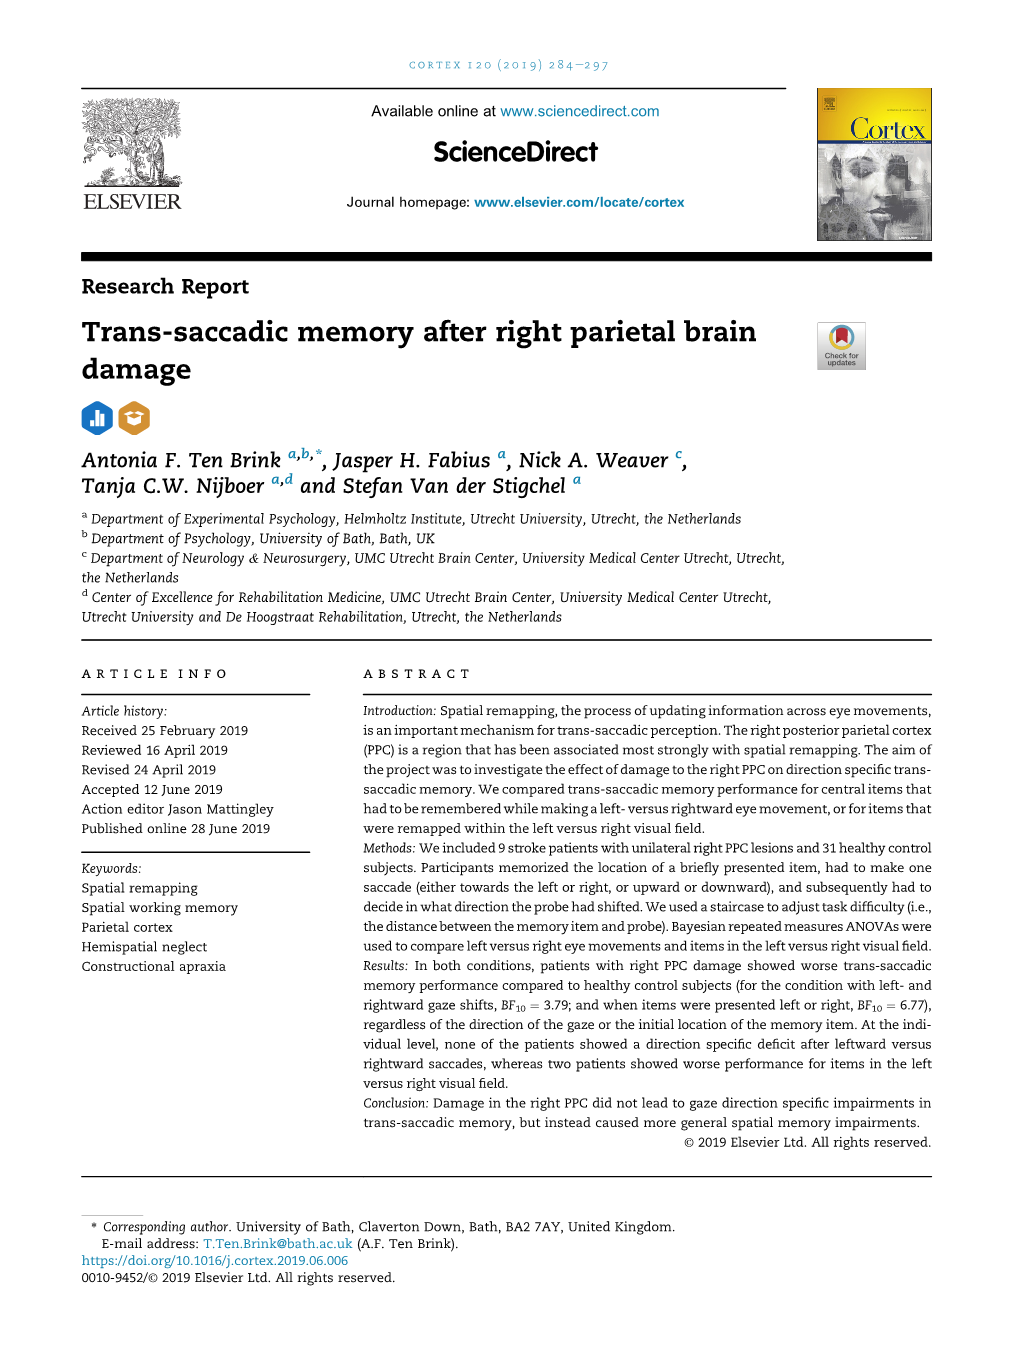 Trans-Saccadic Memory After Right Parietal Brain Damage